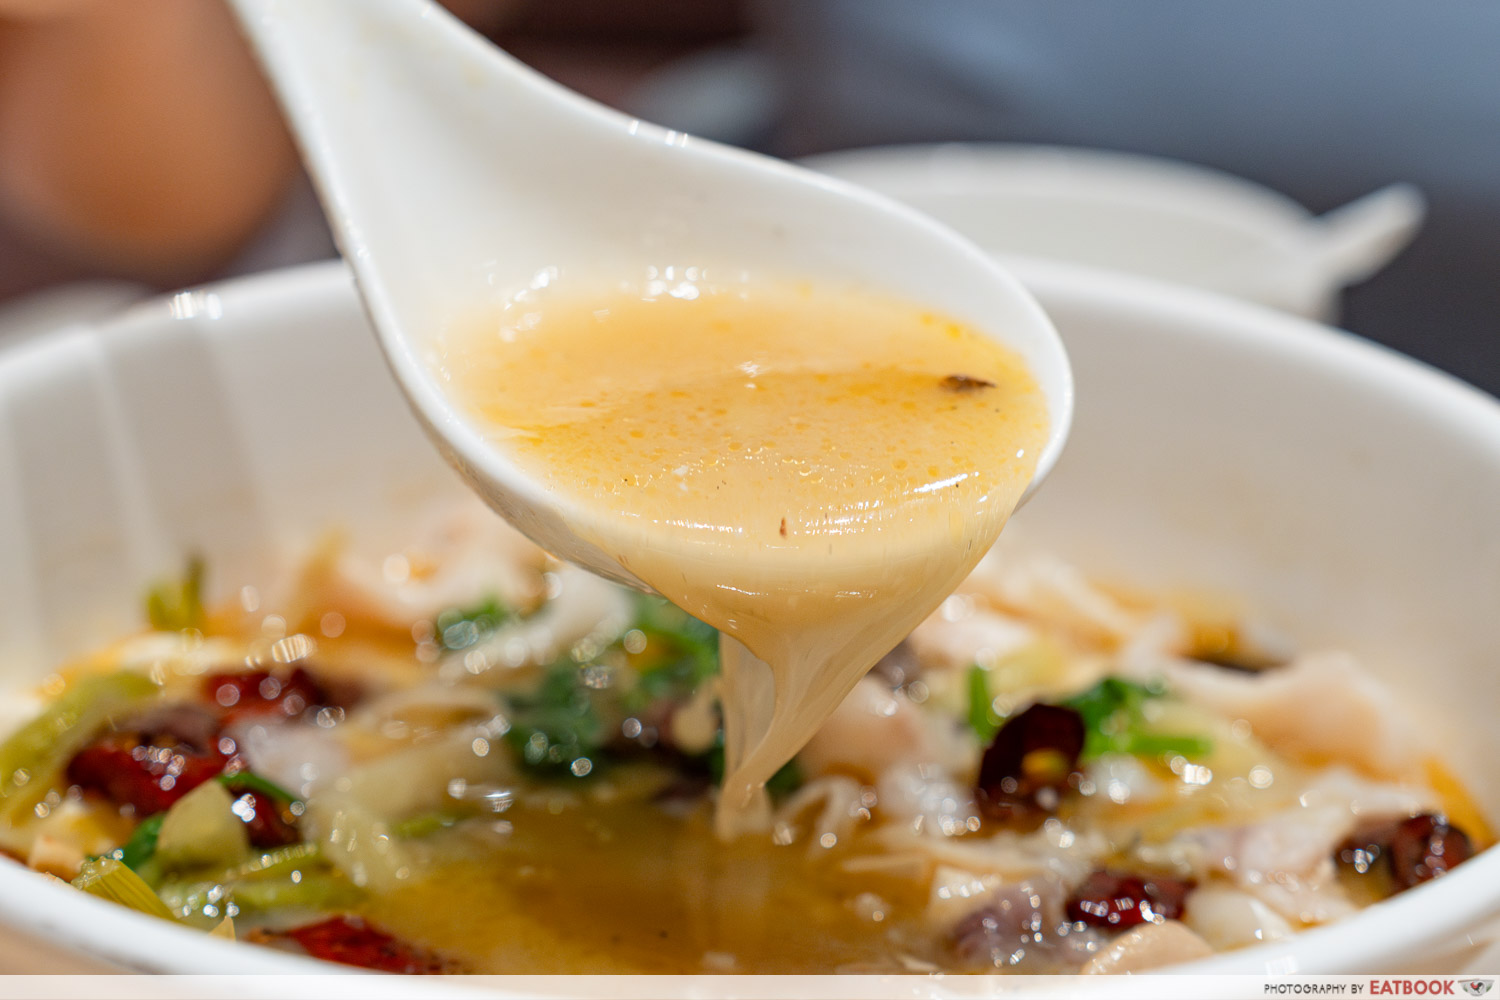 ju xing home - poached fish in sichuan chilli oil soup pour